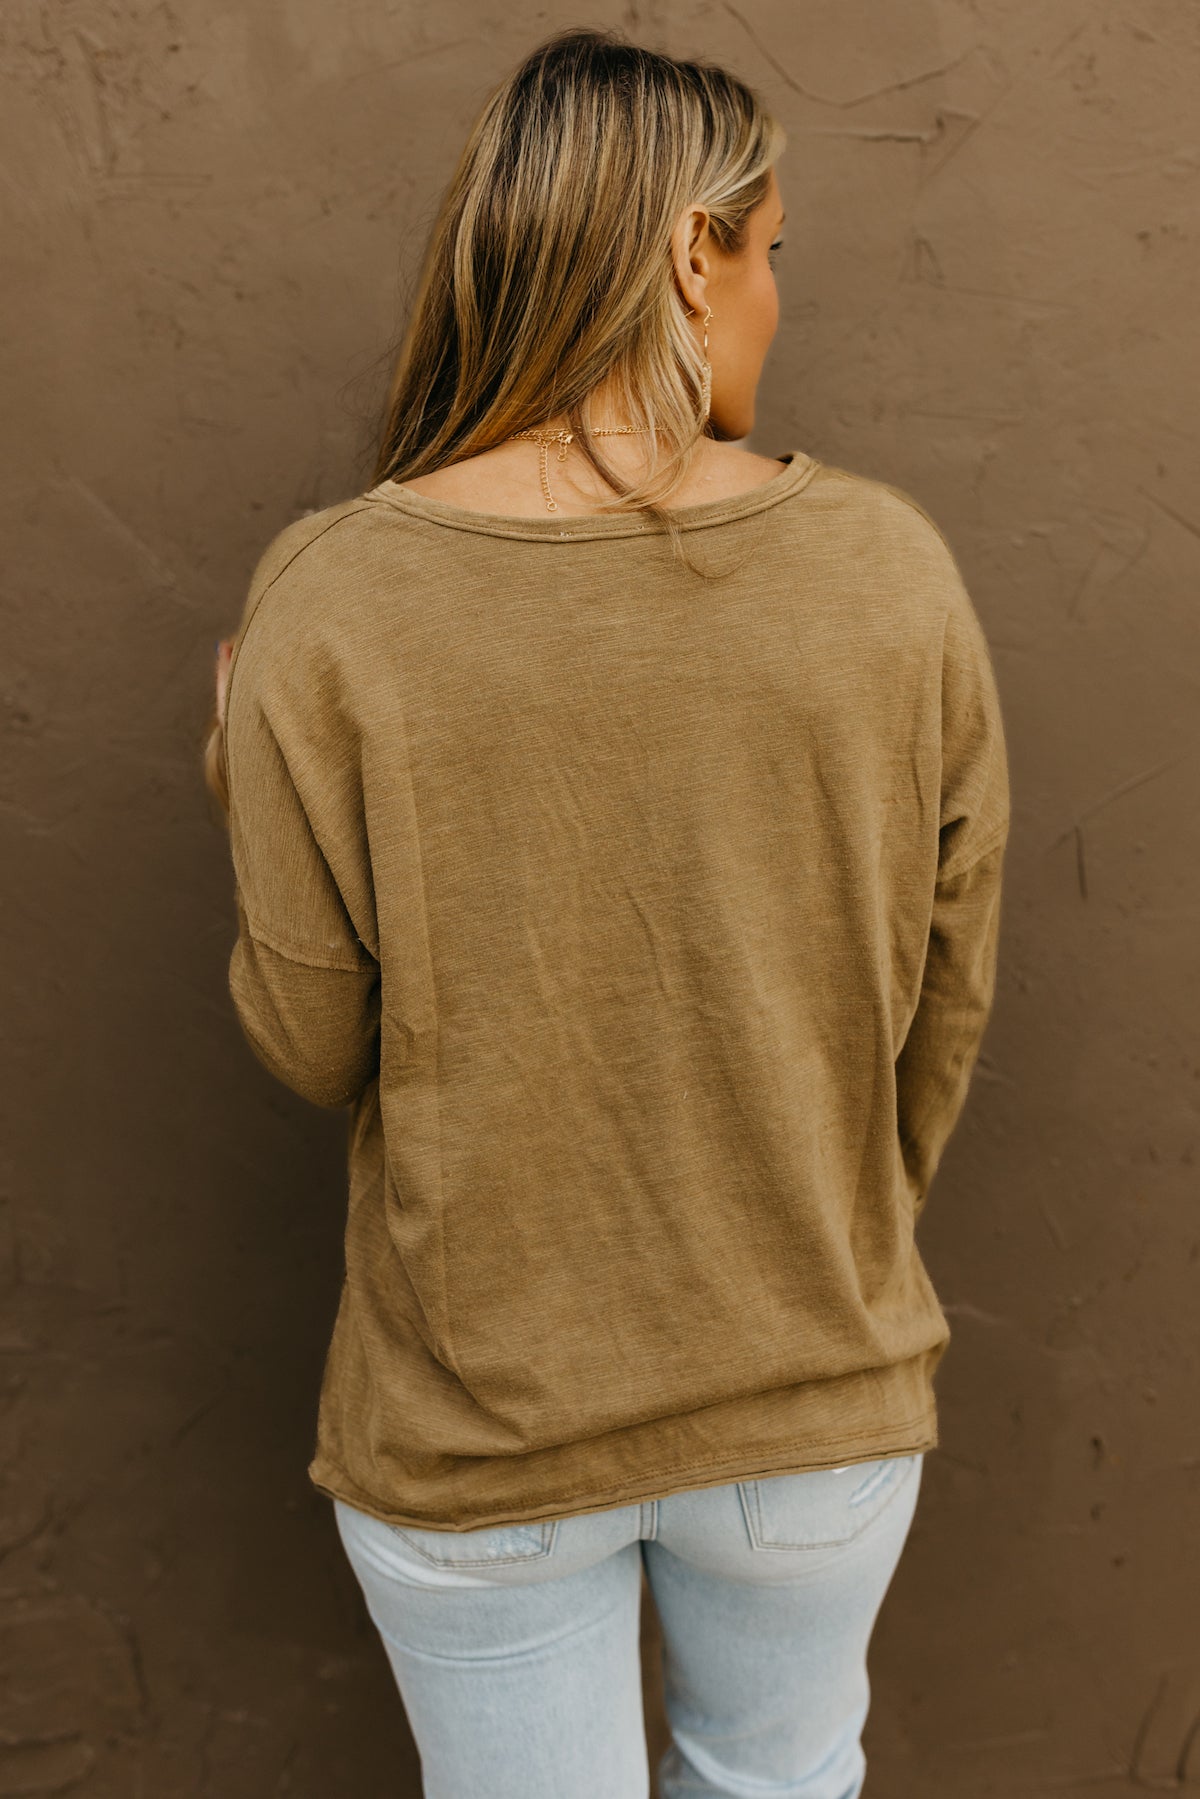 The Riah Eyelet Knit Henley Top  - FINAL SALE